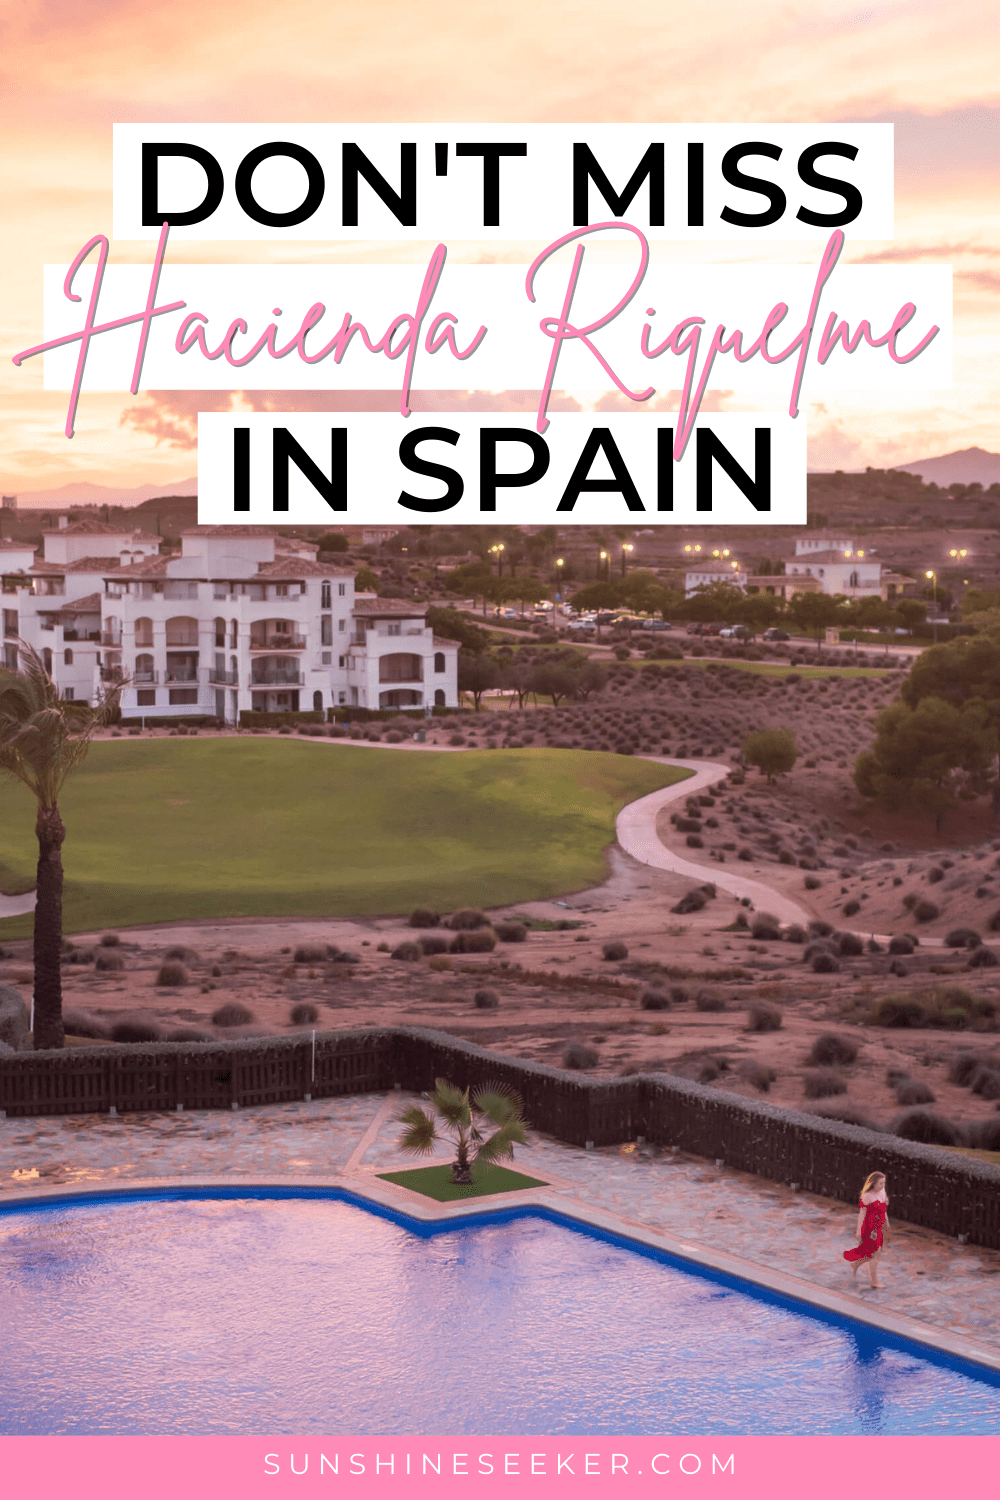 Looking for a holiday destination in Murcia, Spain? Just a short flight from the UK, don't miss the incredibly beautiful Hacienda Riquelme, one of the best golf resorts in Spain. Murcia is still a mostly untouched and unknown region that you have to experience. Everything you need to know before visiting Hacienda Riquelme Golf Resort!